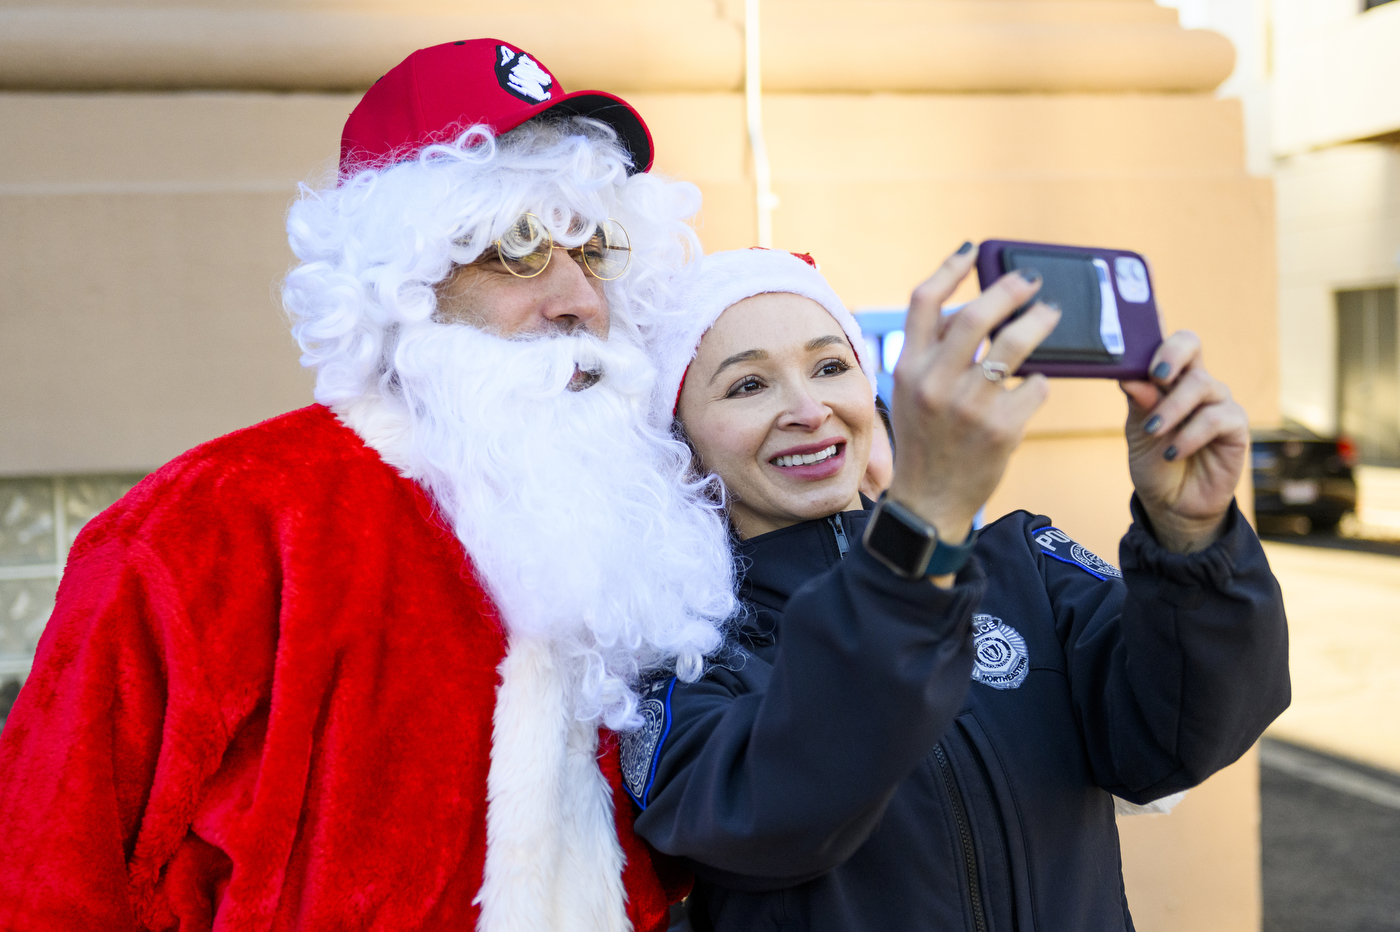 police officer taking a selfie with person dressed up as santa claus